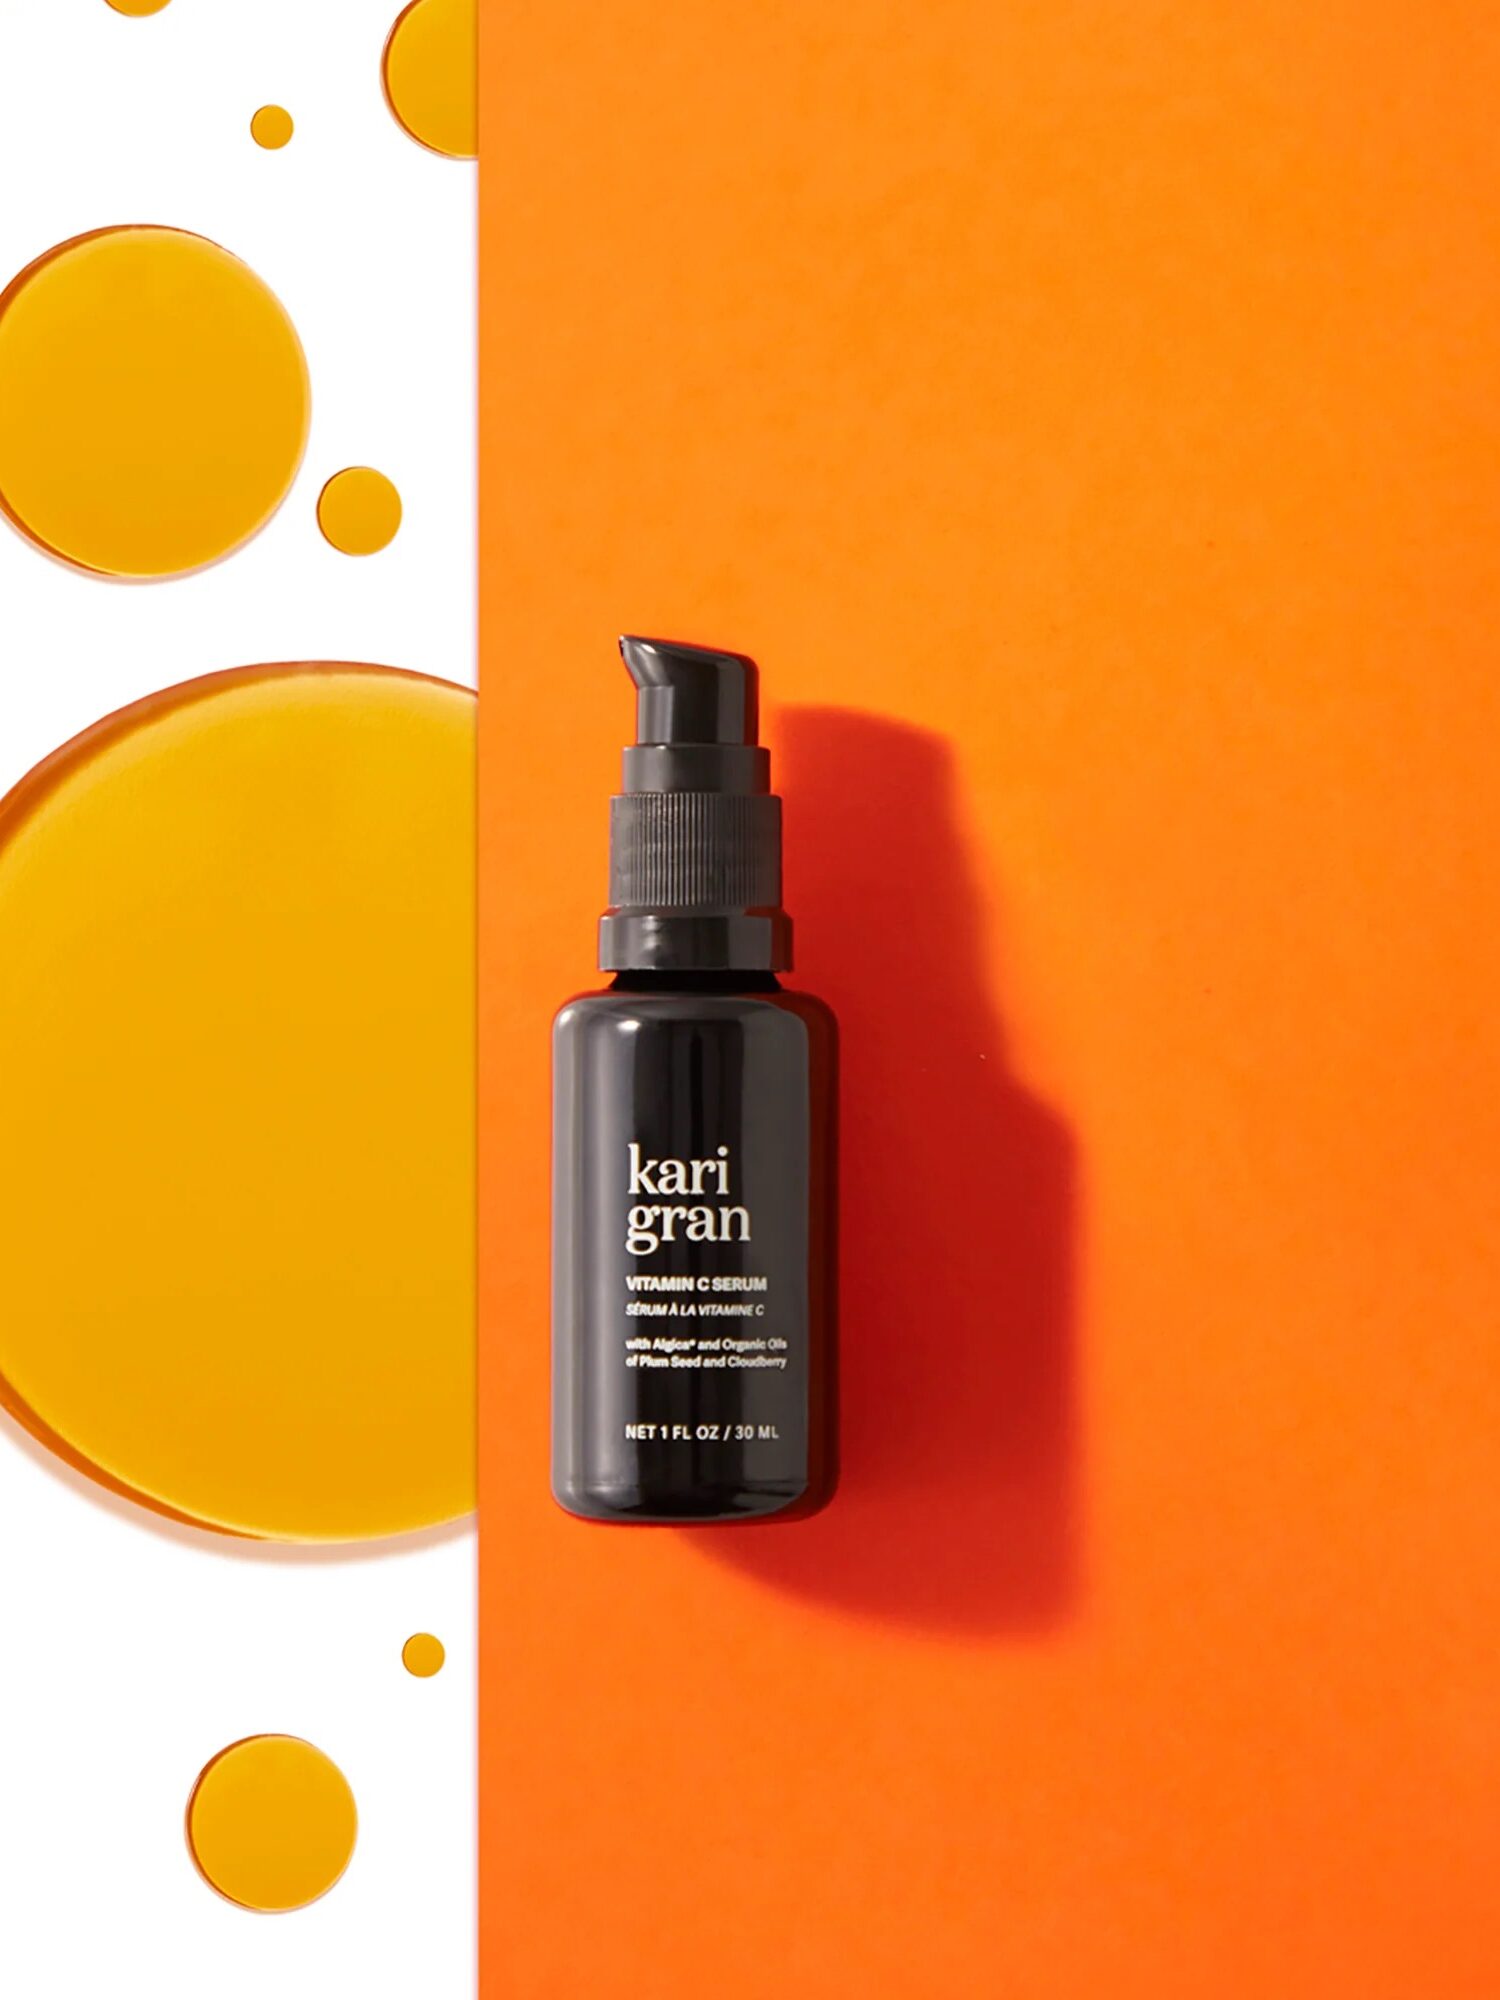 A black bottle of Kari Gran Vitamin C Serum is placed vertically on an orange and white background with scattered yellow oil droplets.